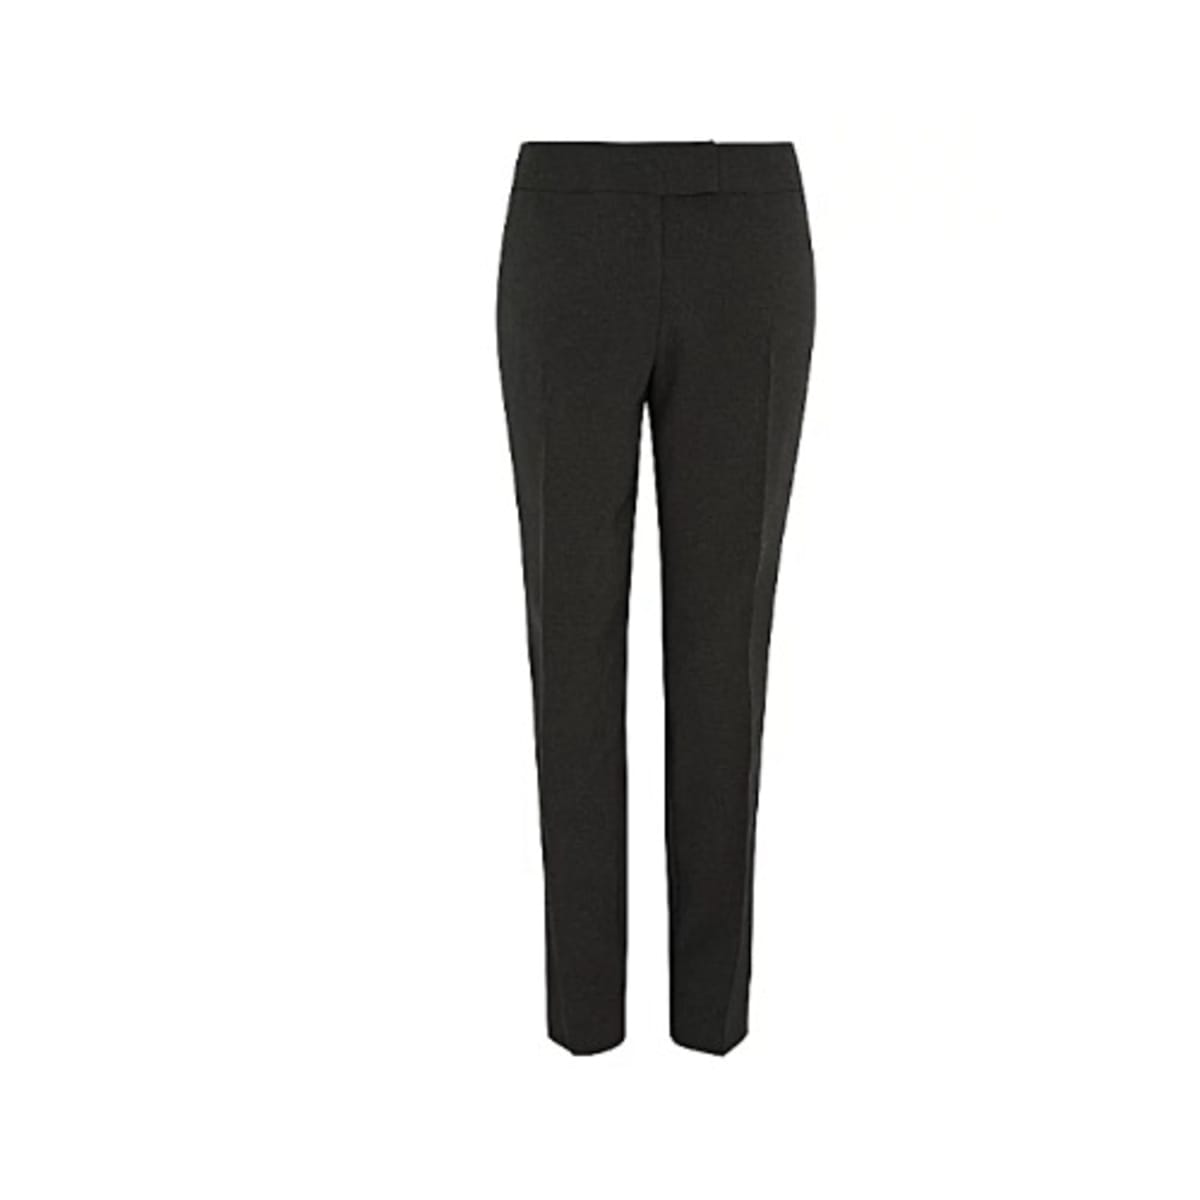 Women's Tapered Trousers - Charcoal Grey